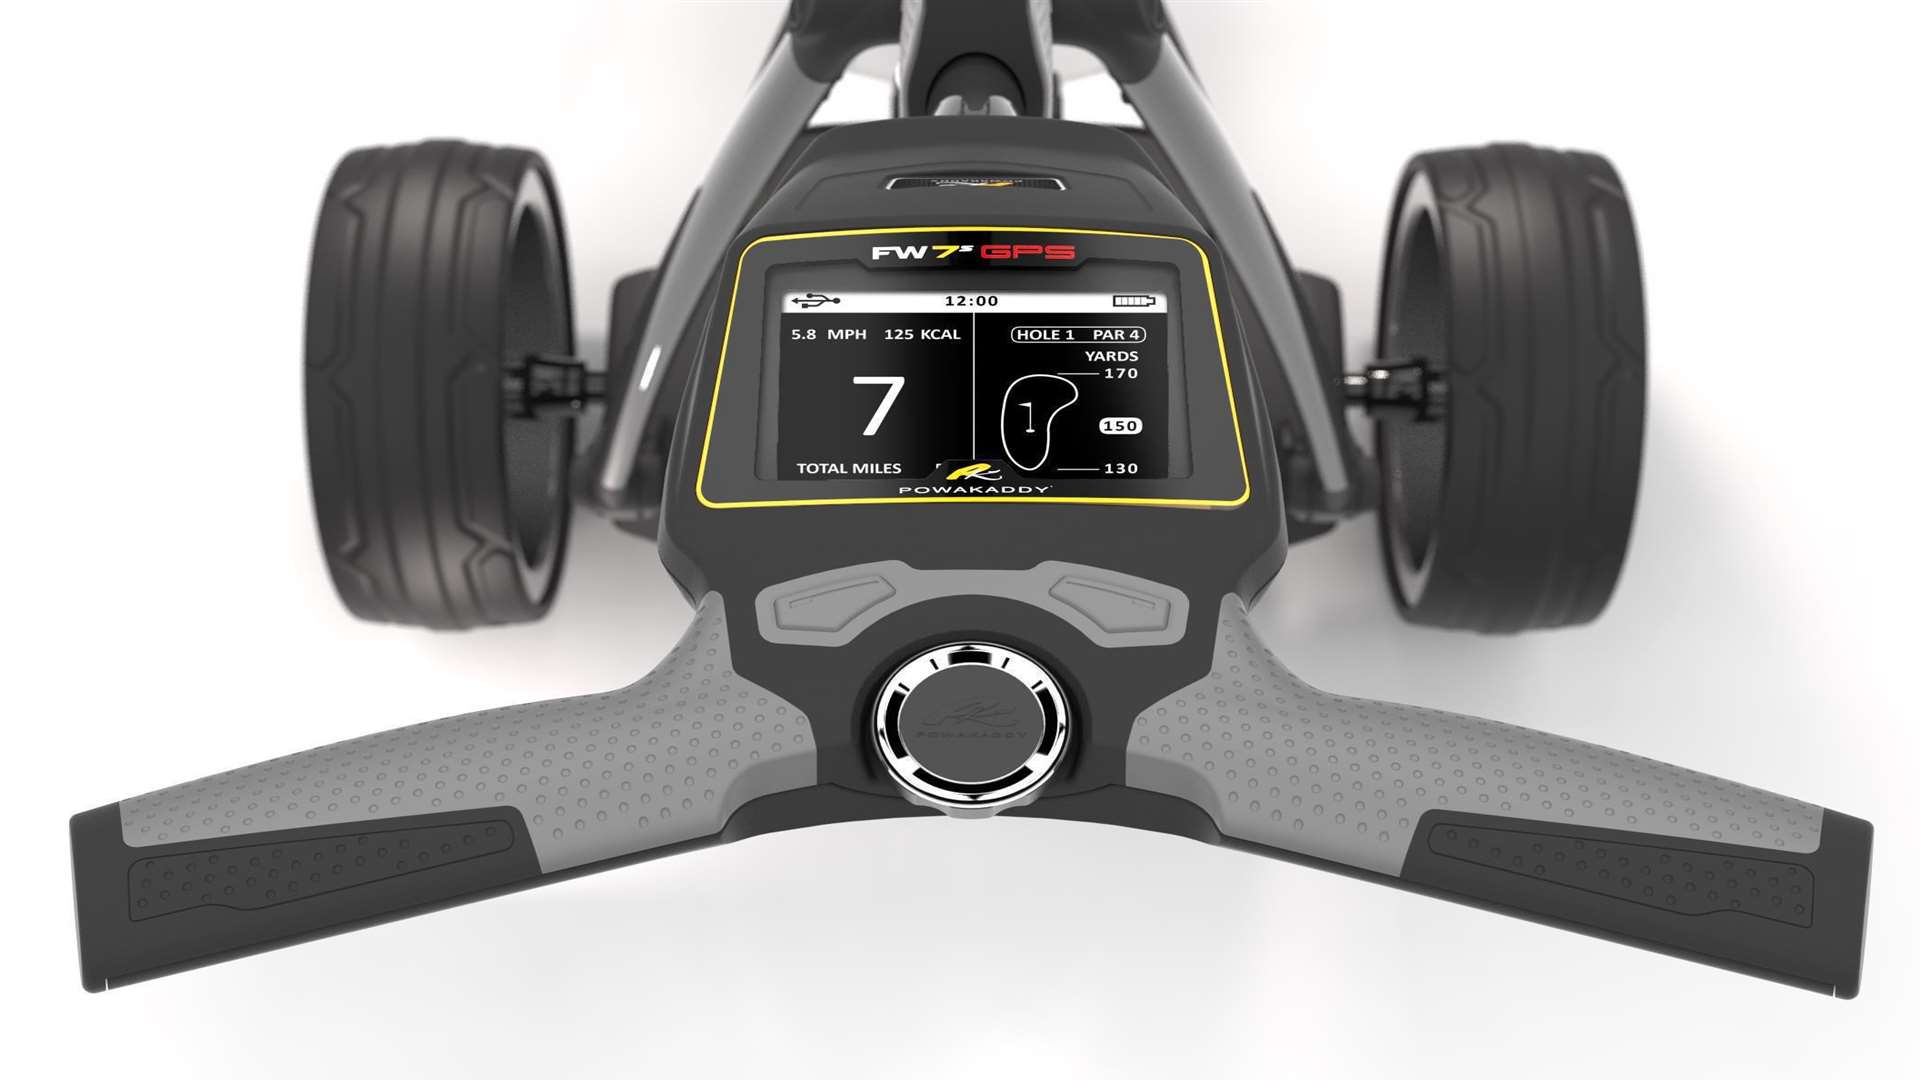 PowaKaddy's new FW7s GPS, which is the first electric trolley in the world to have built-in GPS technology